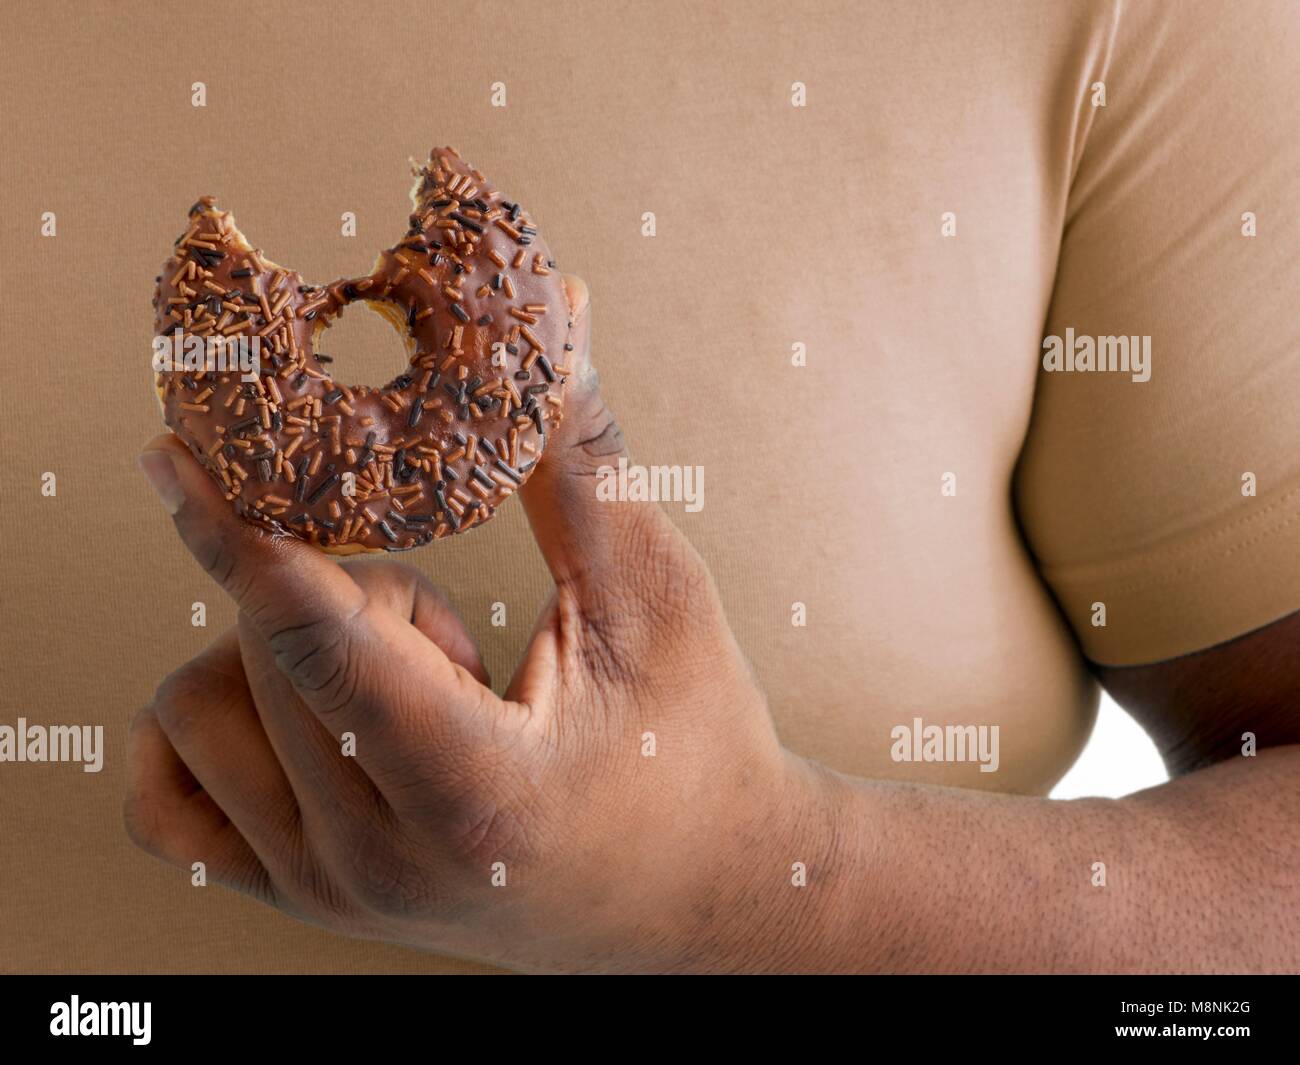 Overweight man holding a doughnut with a missing bite. Stock Photo